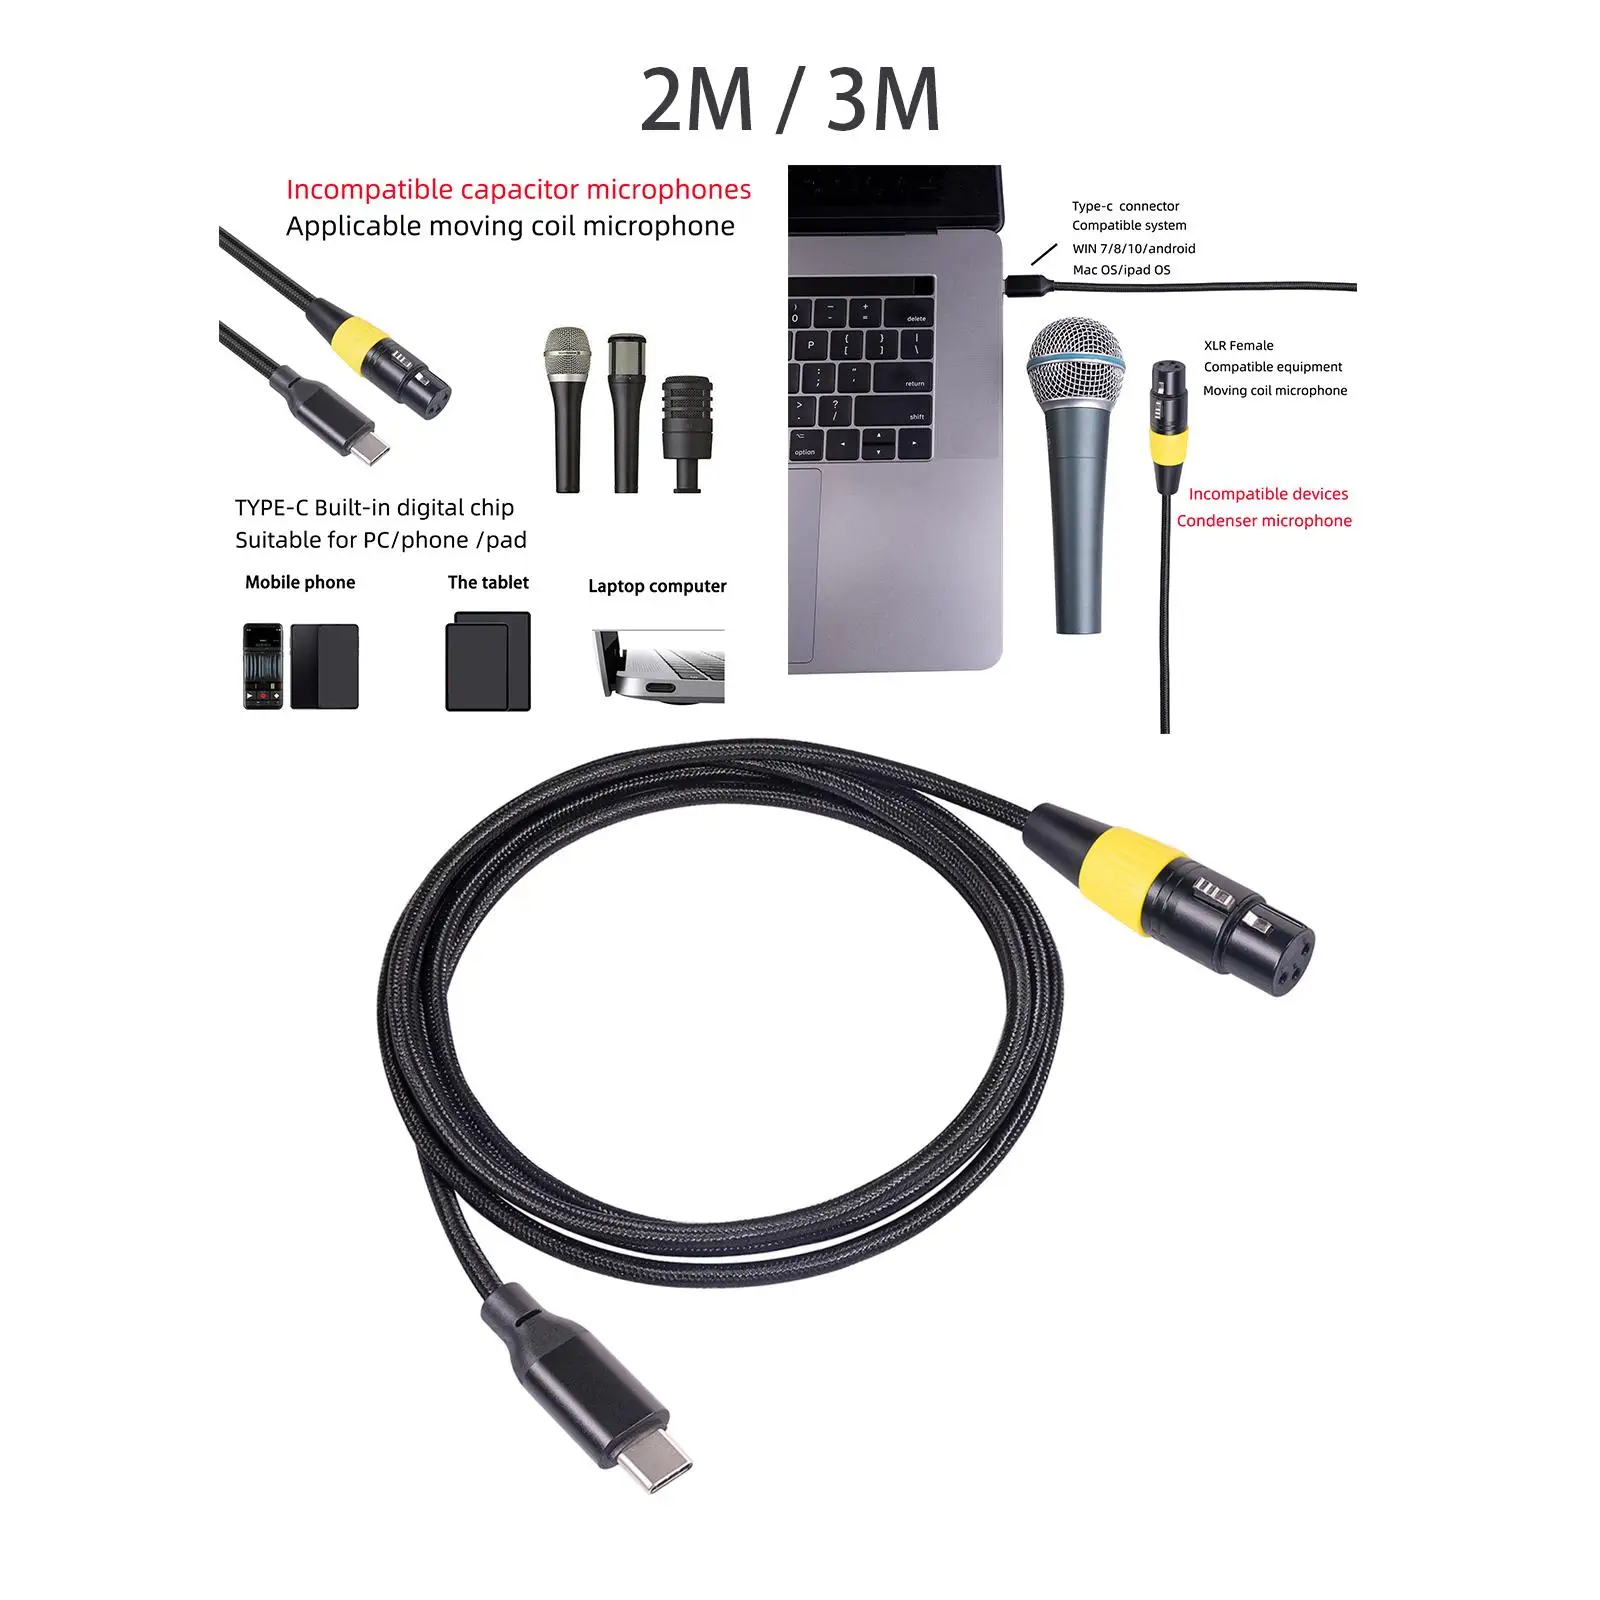 Multifunction XLR Female to USB Microphone Cable Simple to Use Sing Audio Cable Male to Female for Smartphones Computer